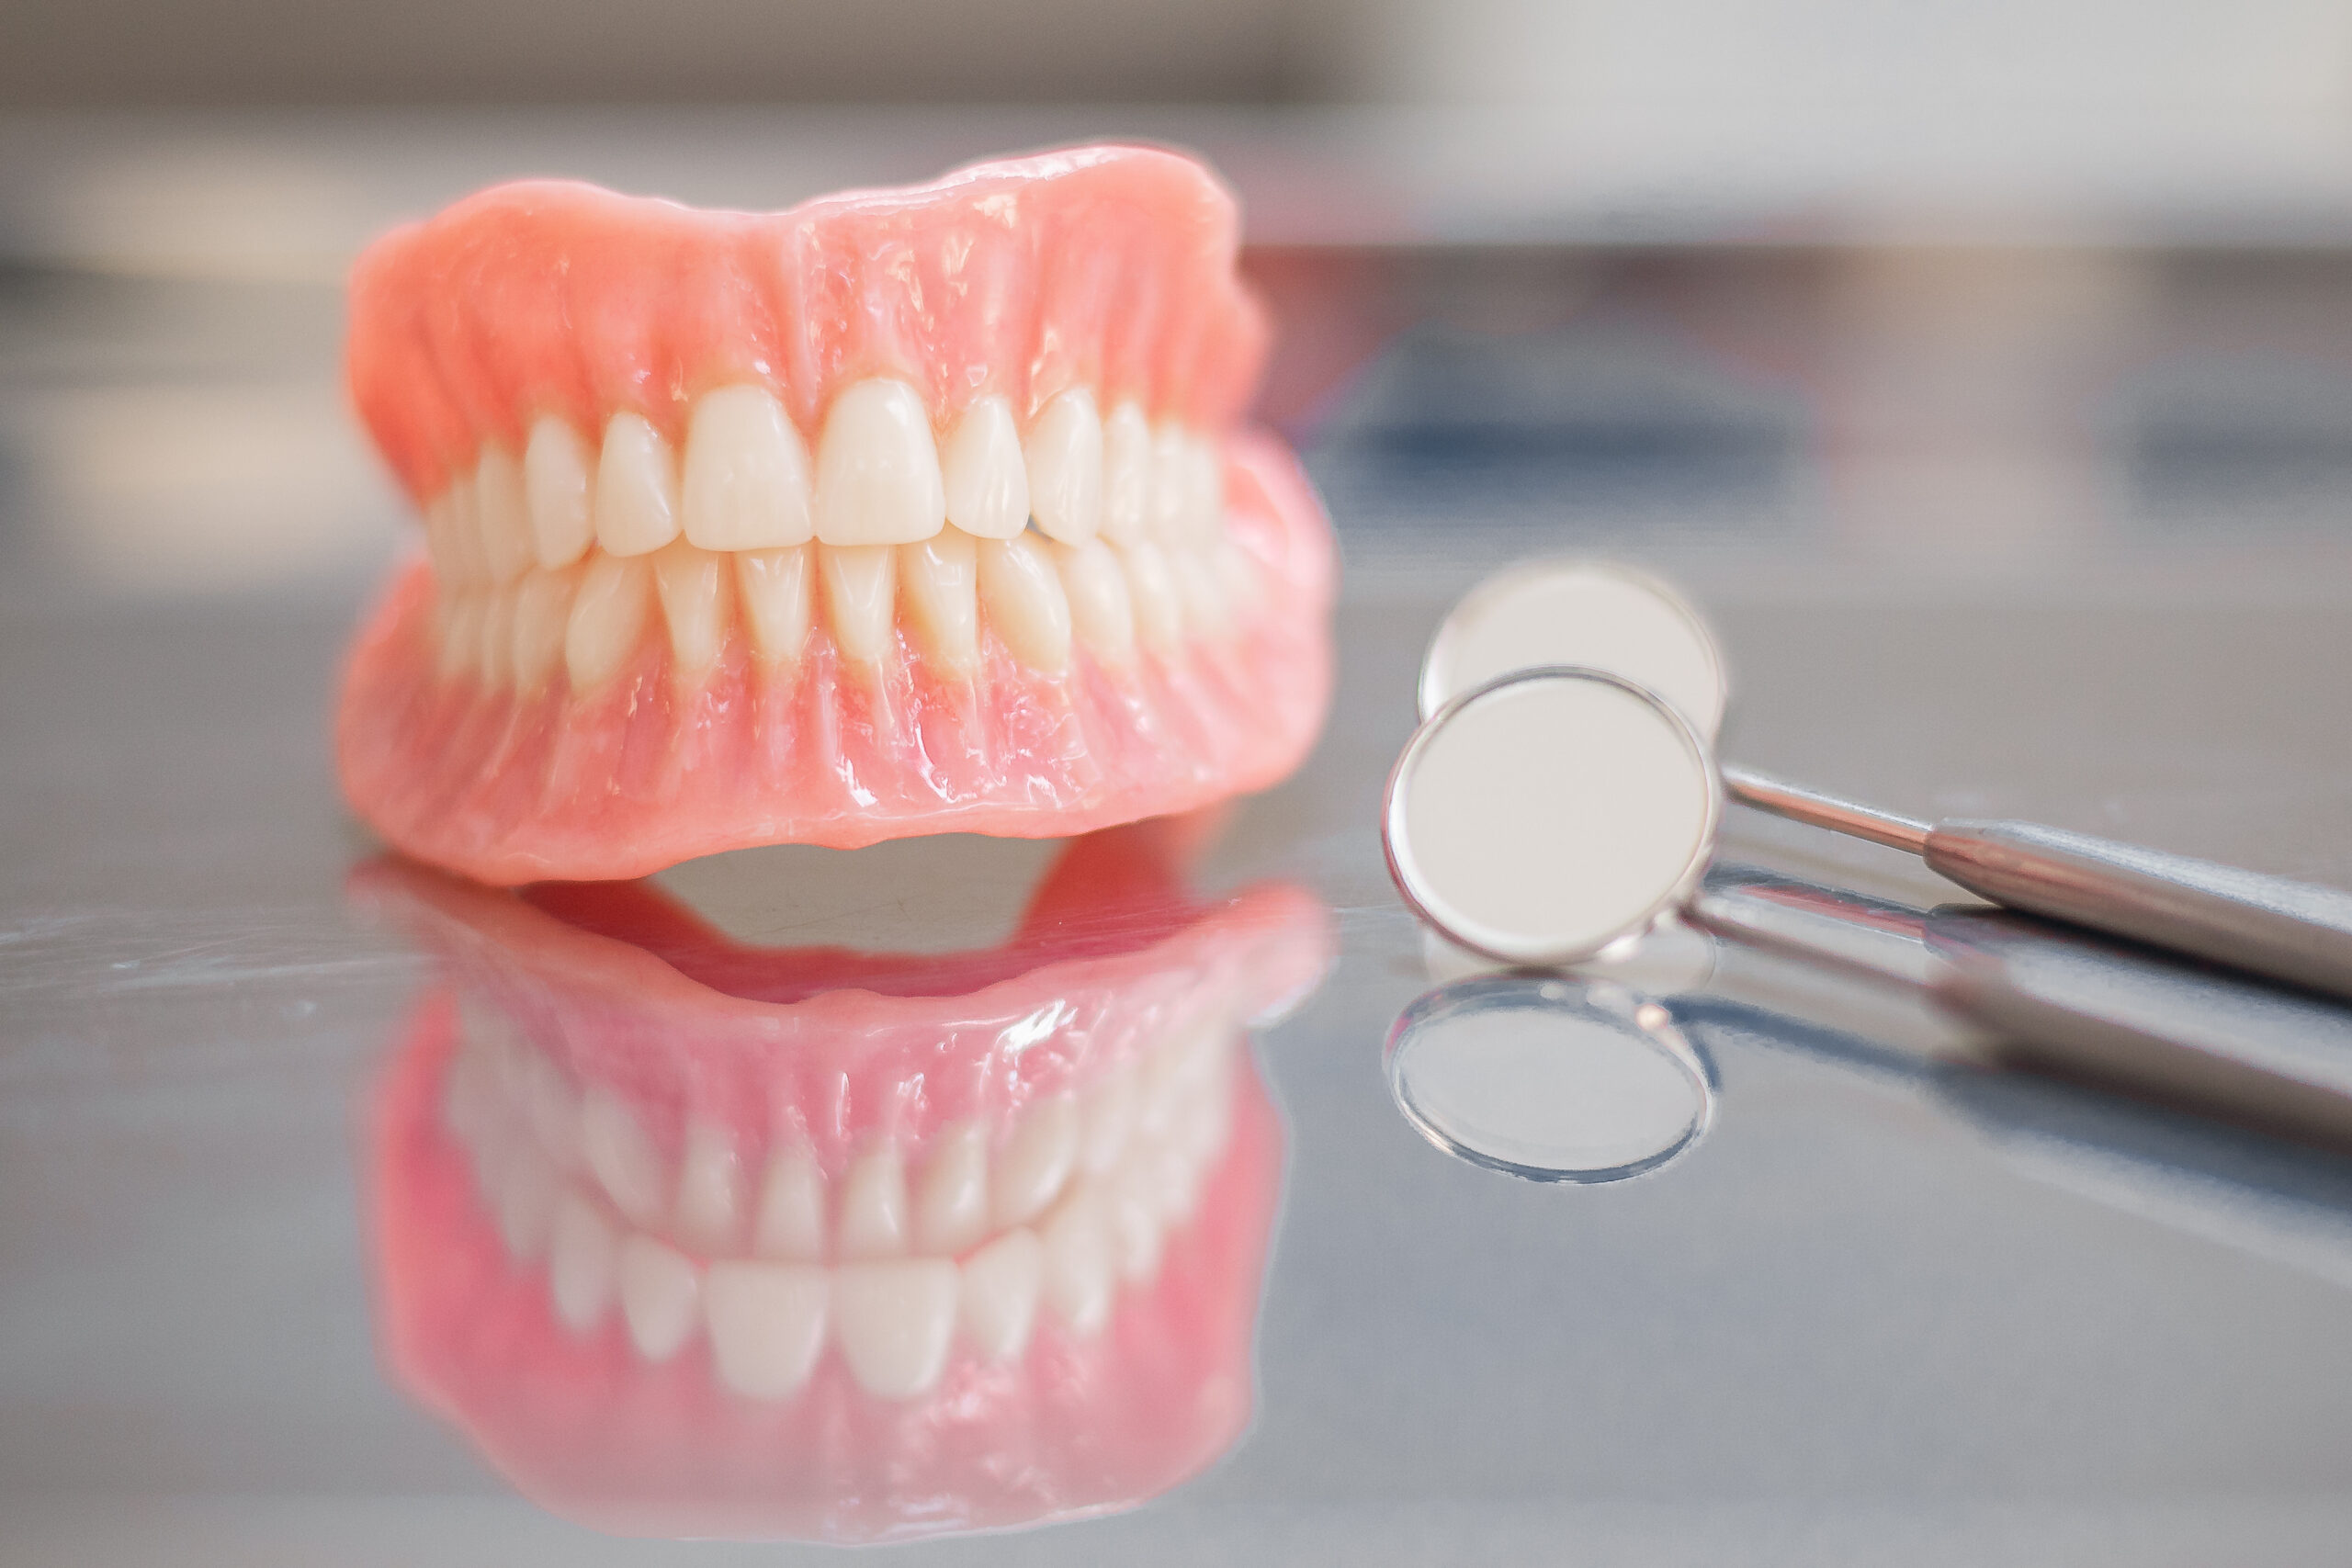 Two dentures. Instruments and dental hygienist checkup concept with teeth model dentures and mouth mirror. Regular dentist checkups